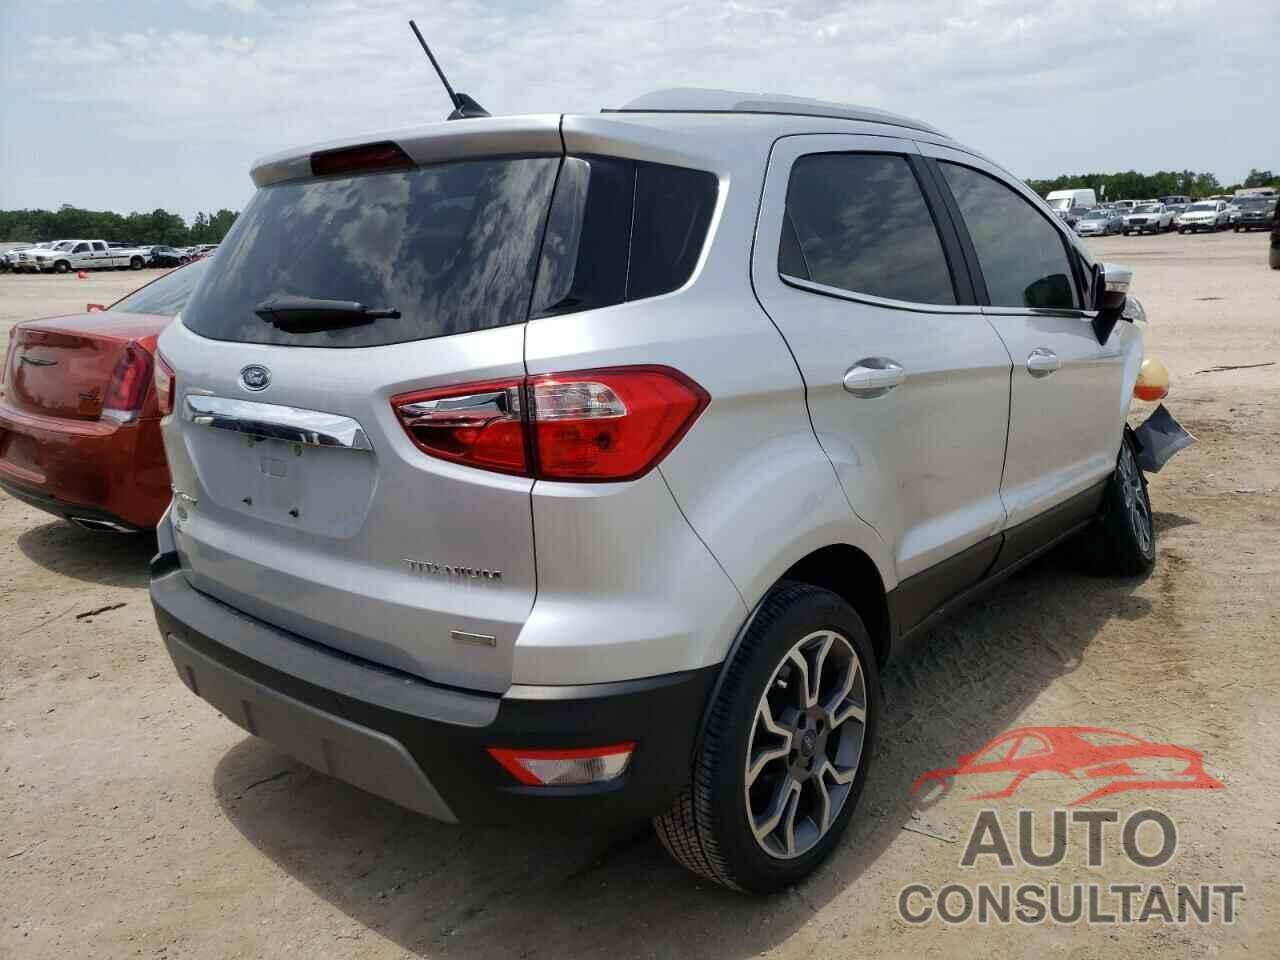 FORD ALL OTHER 2018 - MAJ3P1VE3JC217308